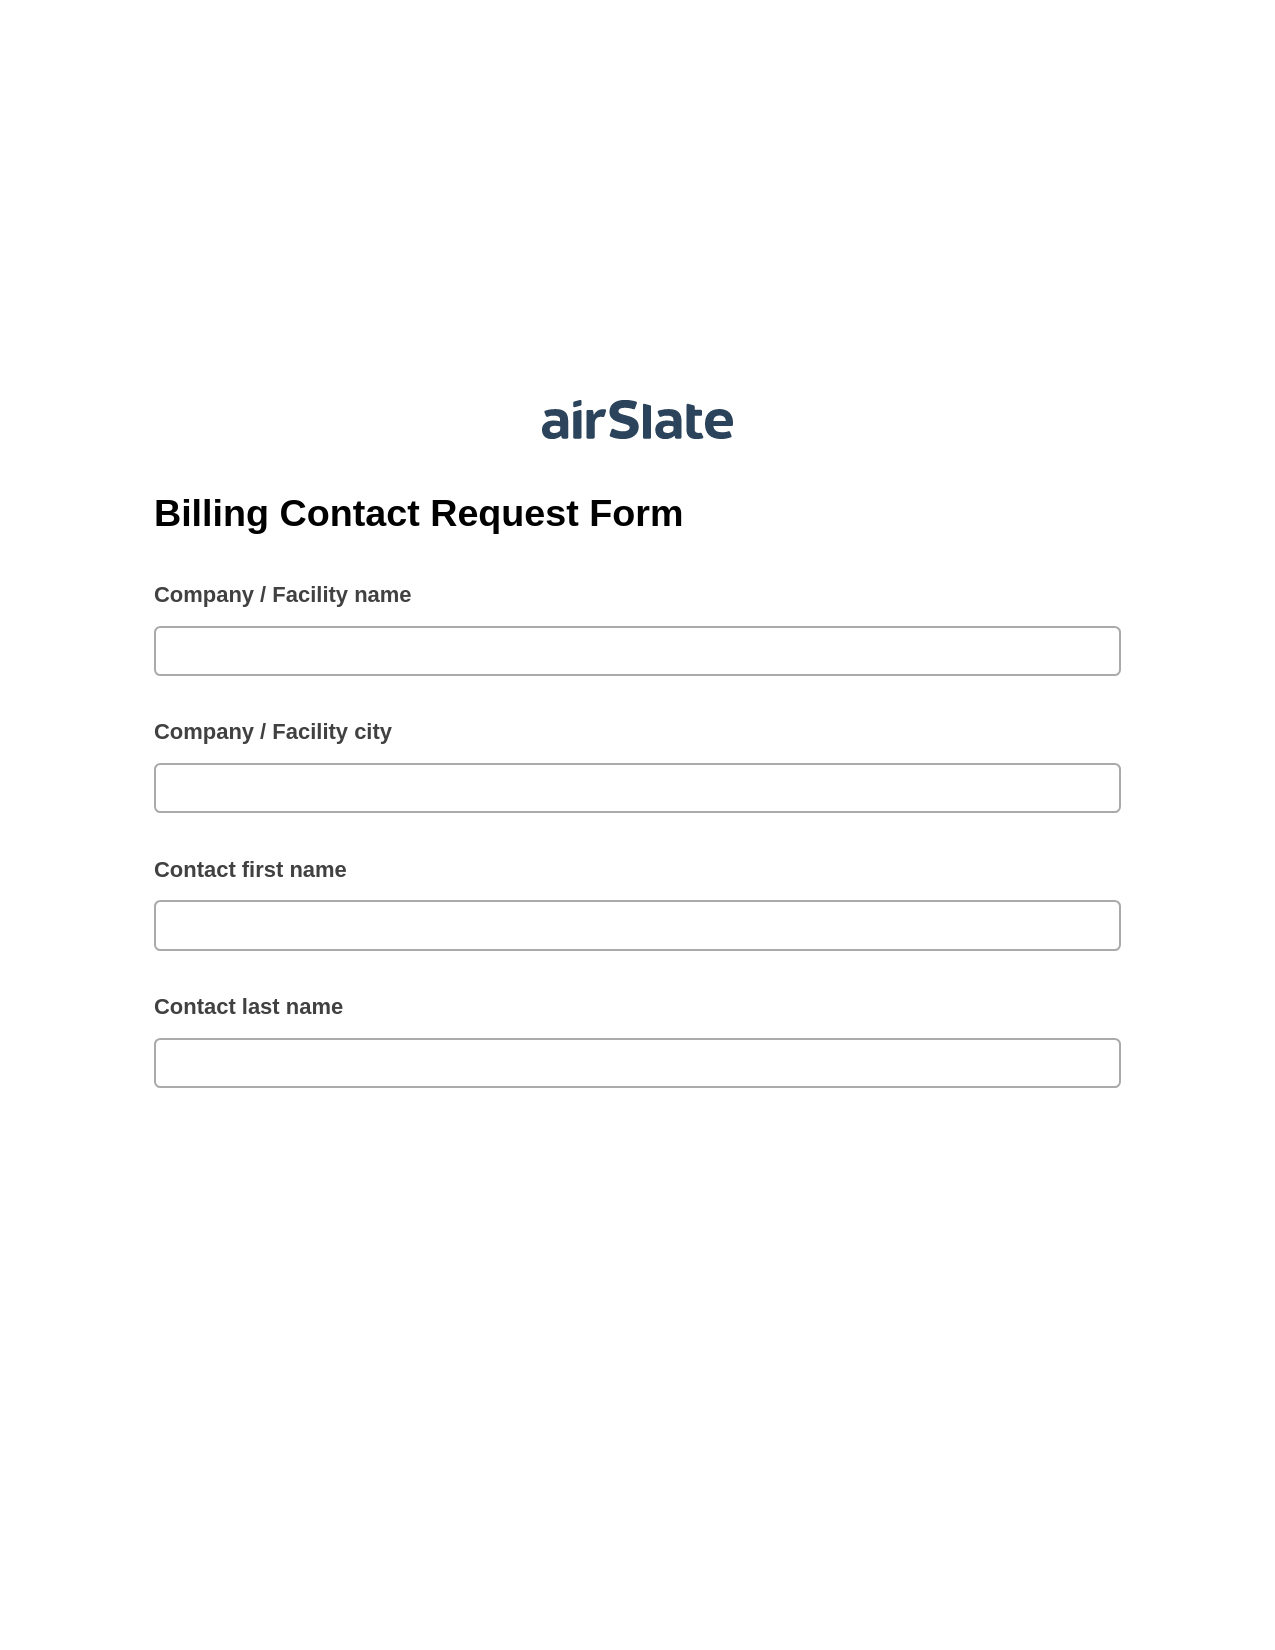 Multirole Billing Contact Request Form Pre-fill from another Slate Bot, Email Notification Bot, Export to Excel 365 Bot